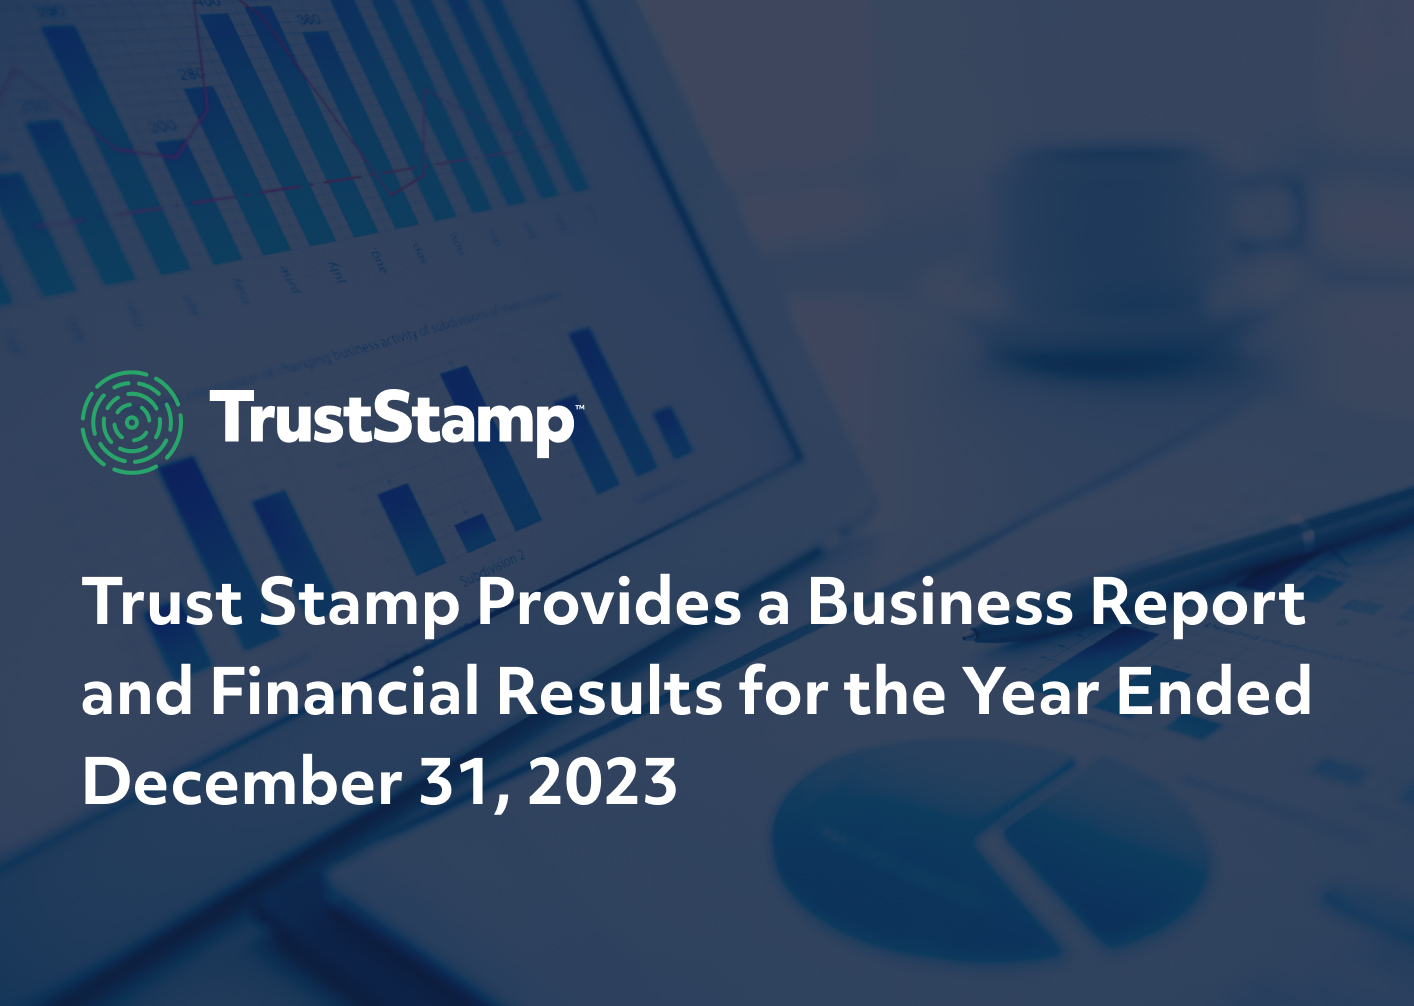 trust-stamp-provides-a-business-report-and-financial-results-for-the-year-ended-december-31-2023